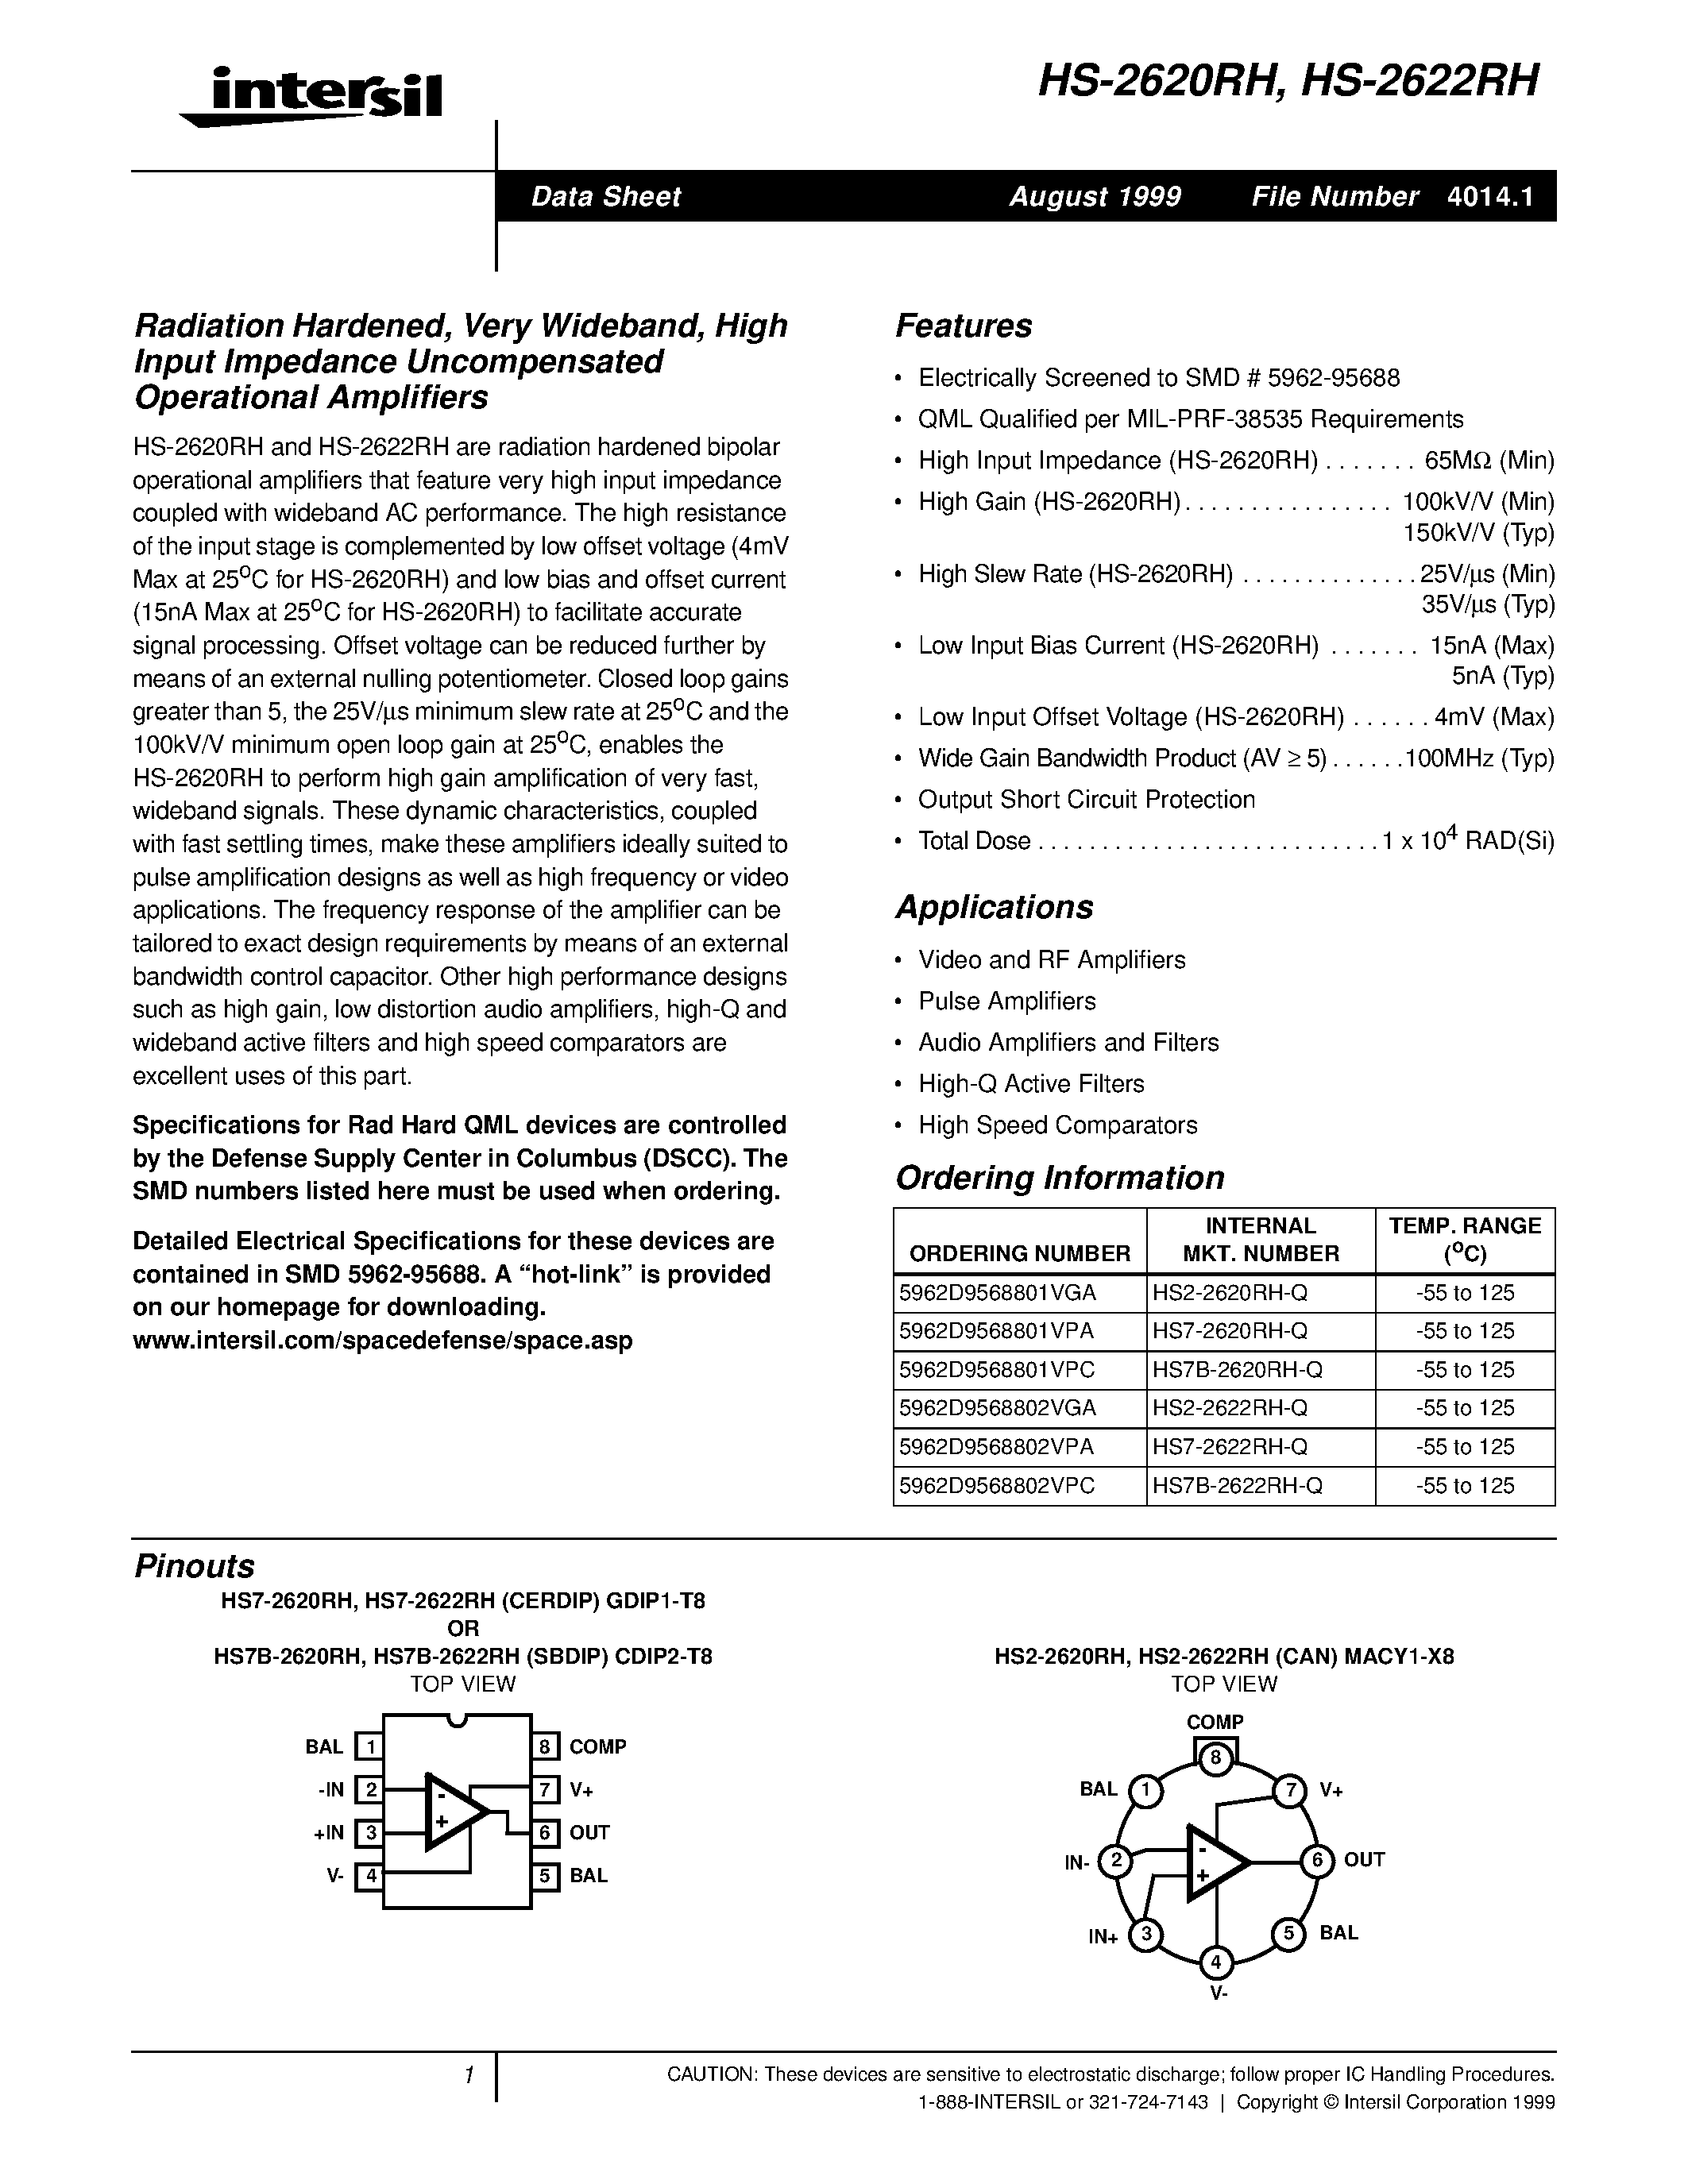 Datasheet HS7B-2620RH-Q - Radiation Hardened/ Very Wideband/ High Input Impedance Uncompensated Operational Amplifiers page 1